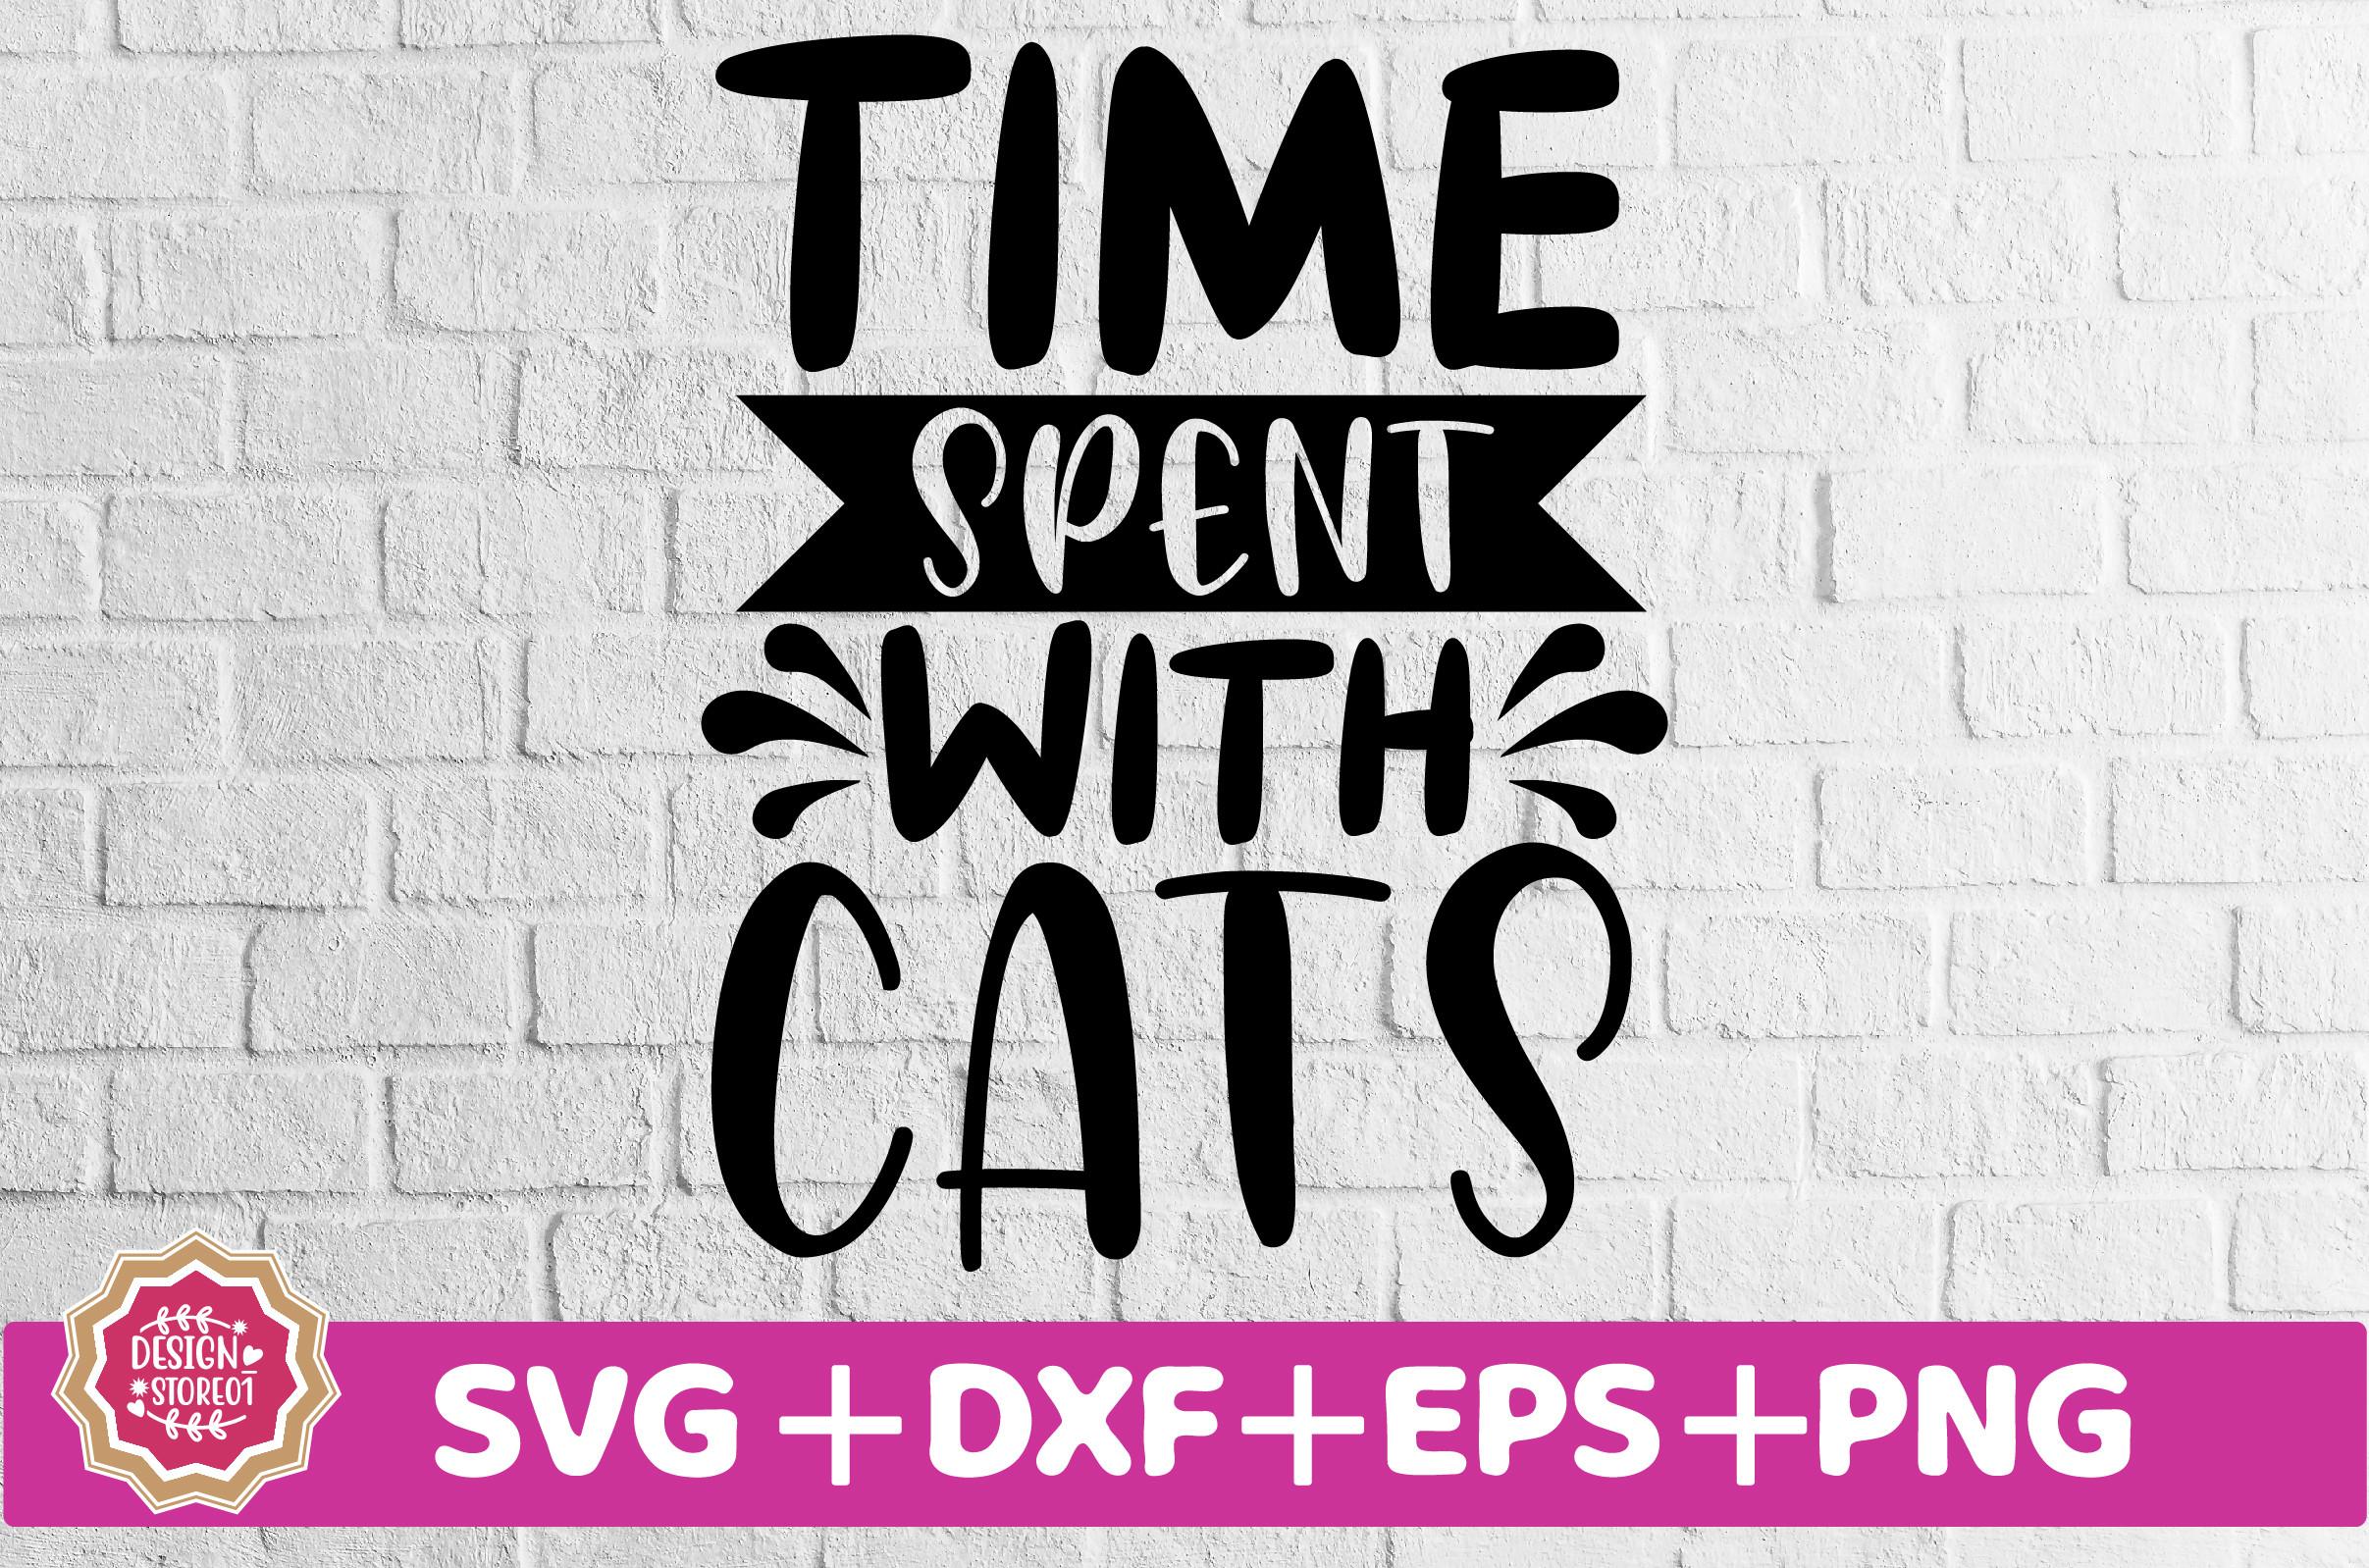 Time Spent with Cats SVG